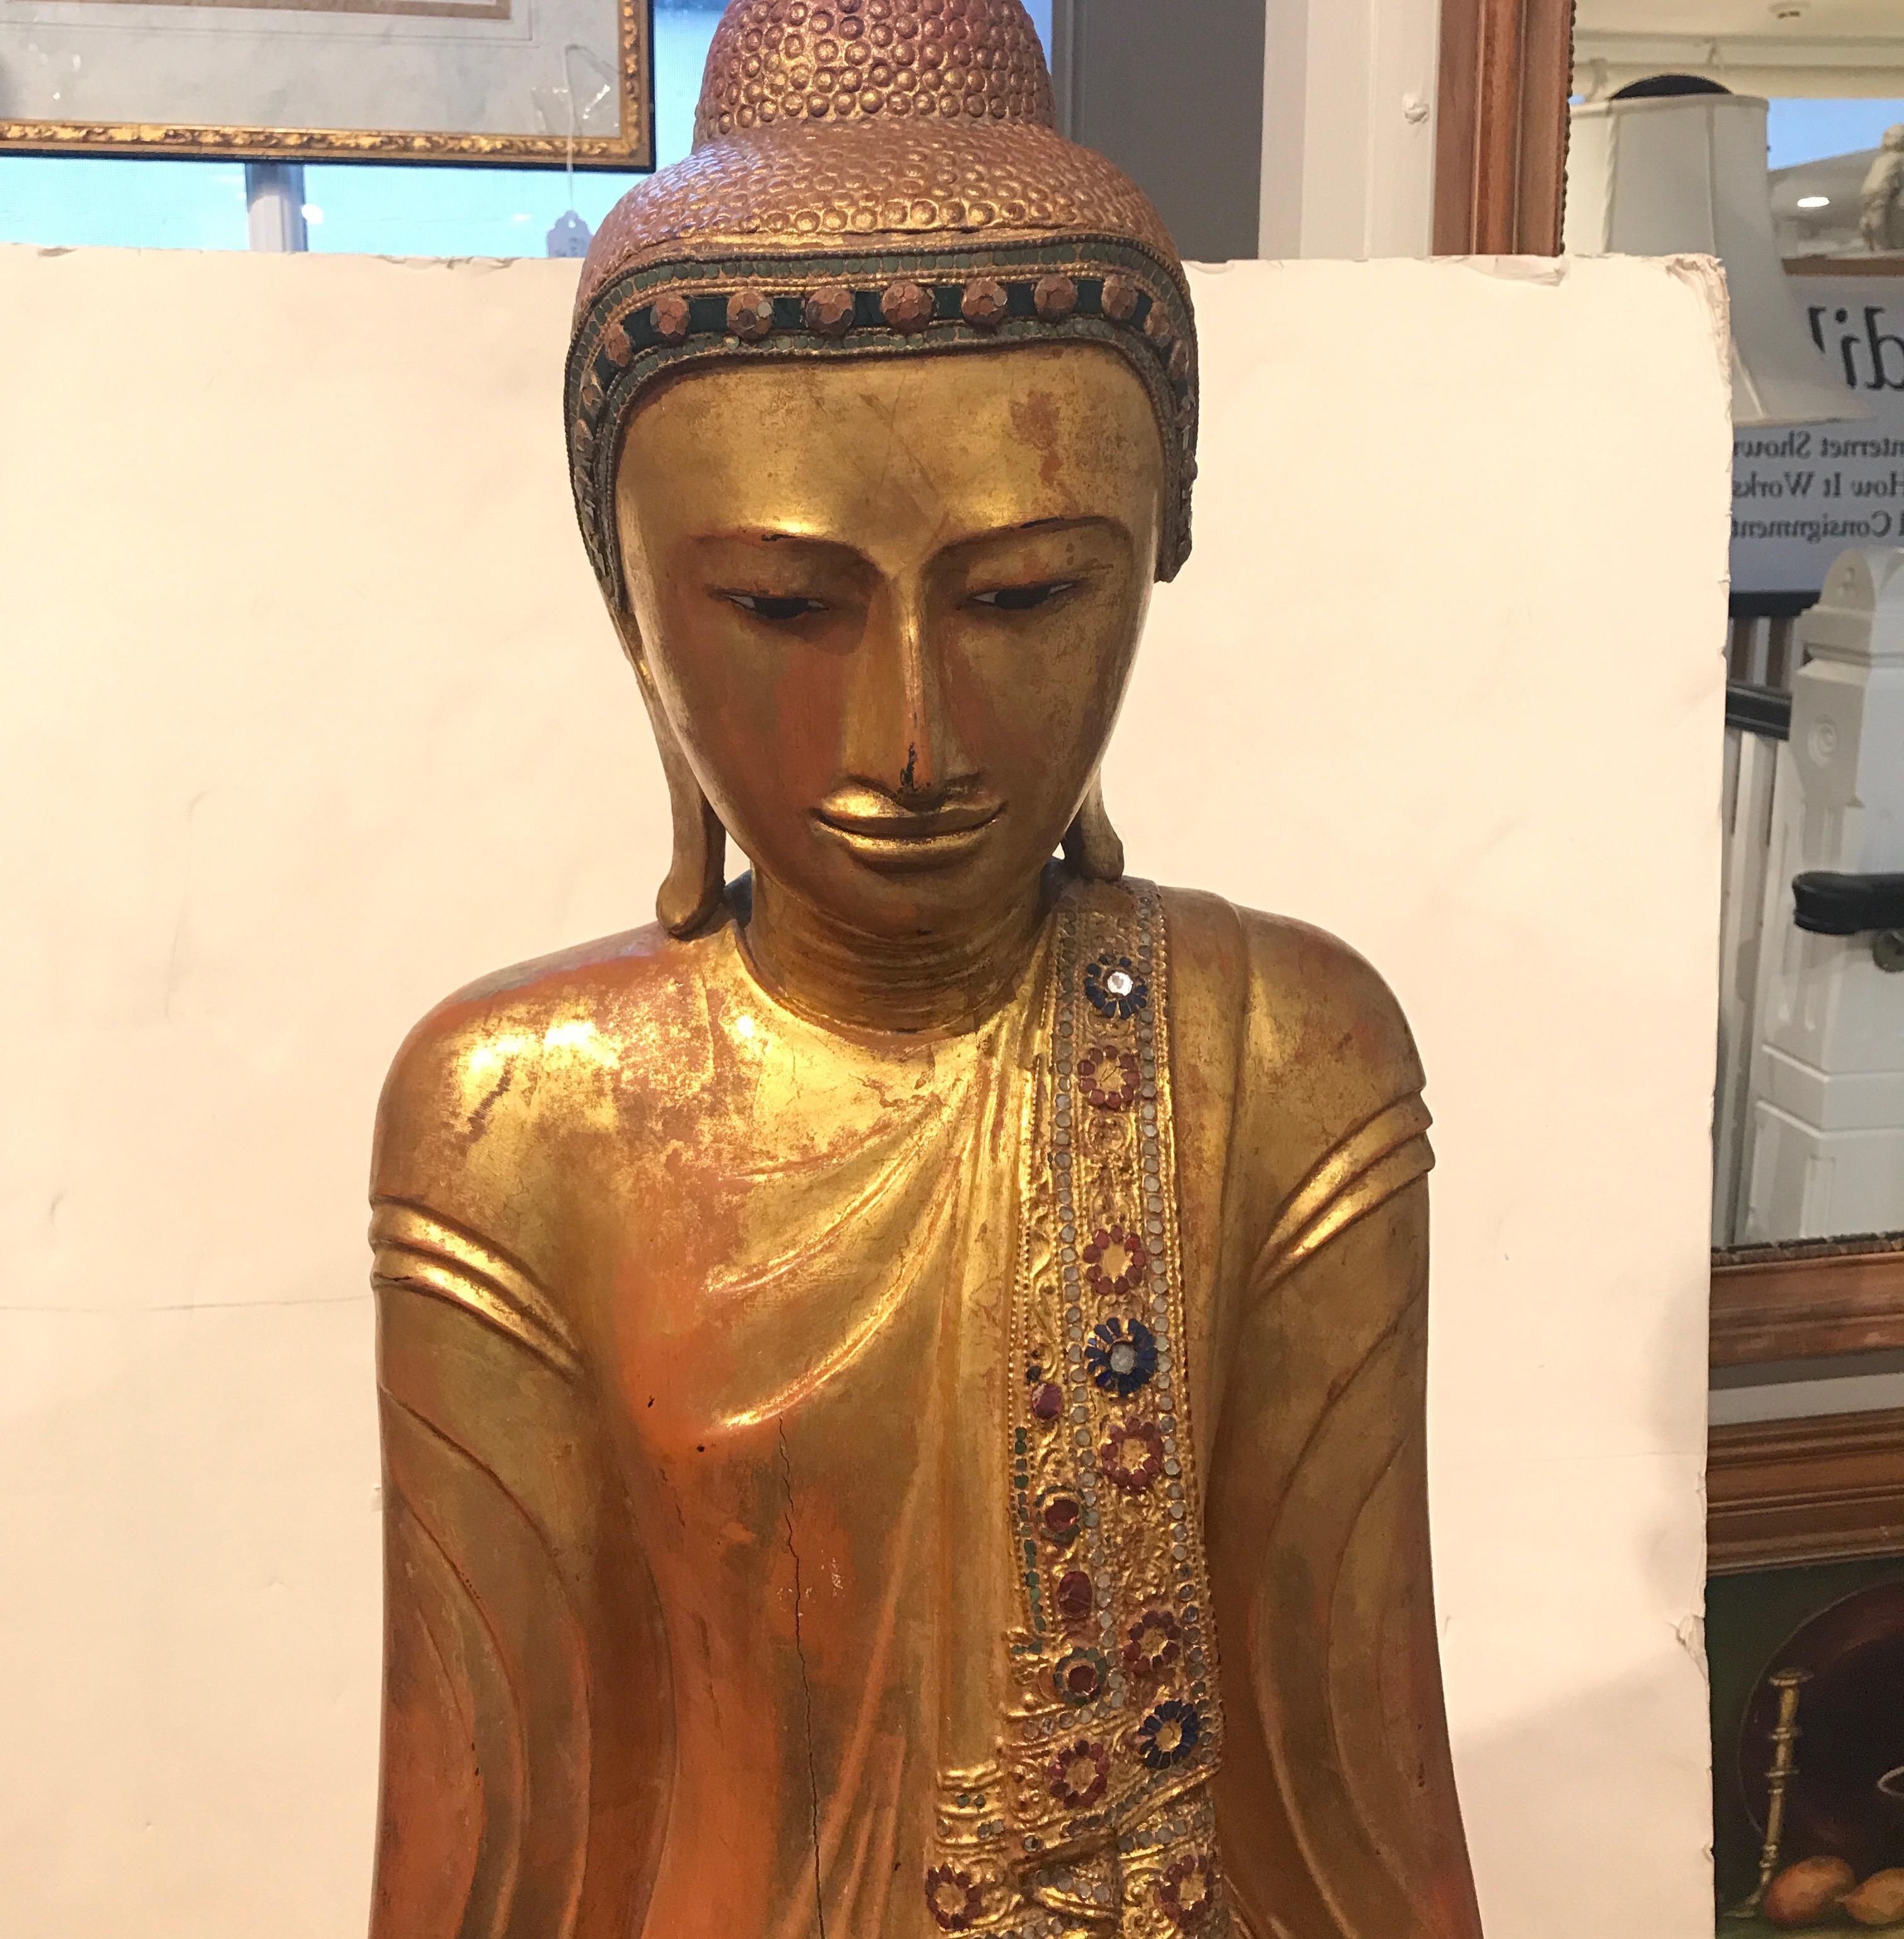 A solid carved wood Thai sculpture of Buddha. The original gold surface with slight wear, decorated with tiny colored mirror trim all around the surface of the clothing. The total height is 61 inches, the total height of just the sculpture is 55